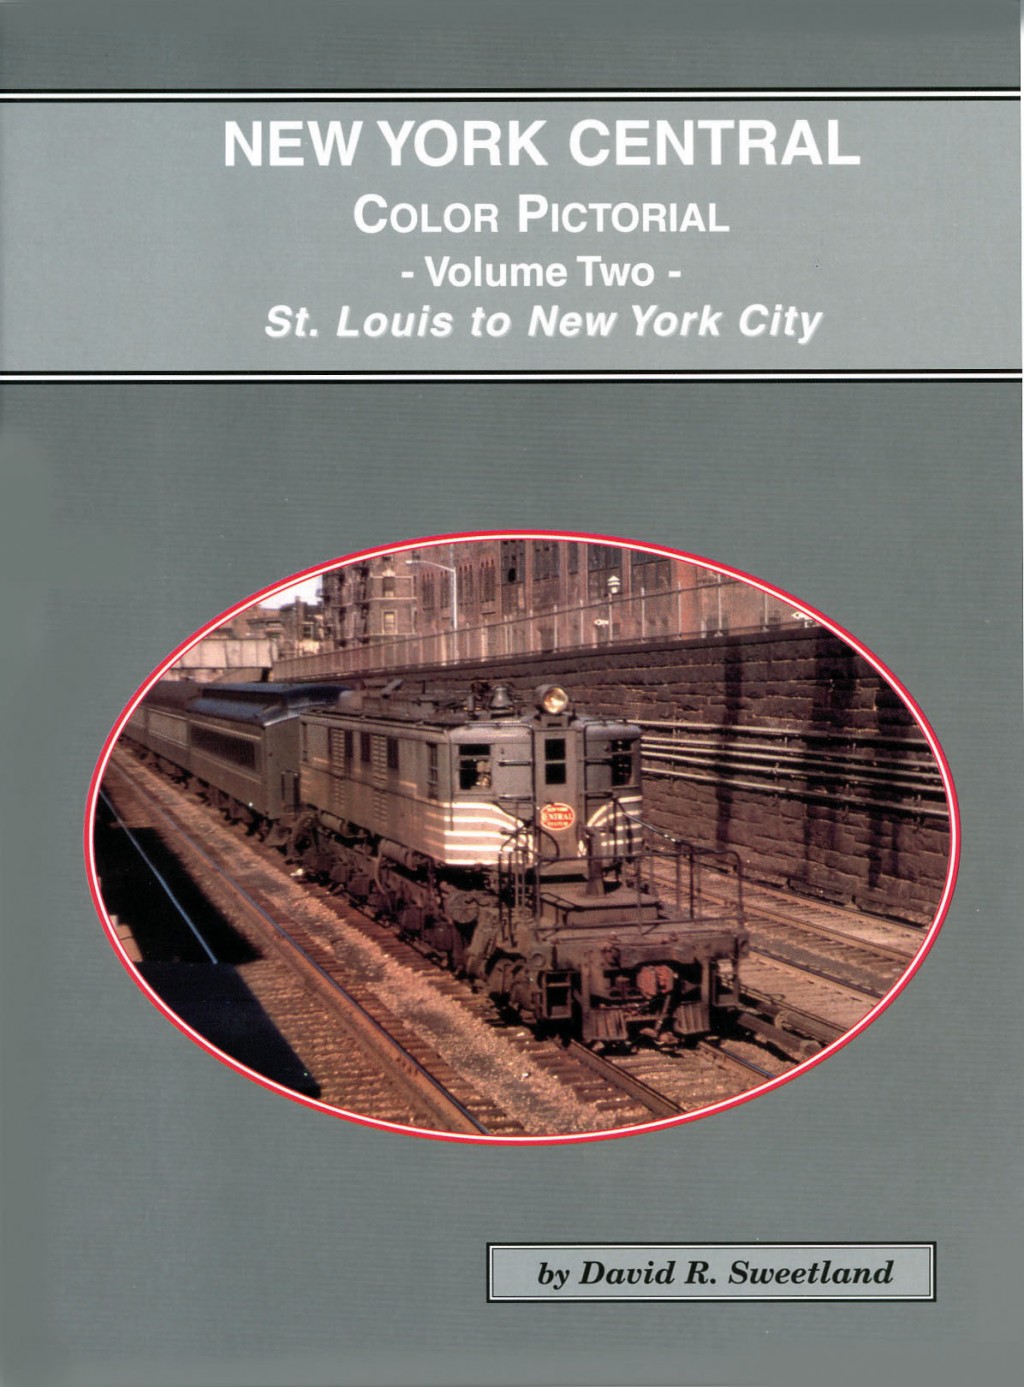 New York Central Color Pictorial: Volume Two - St. Louis to New York City